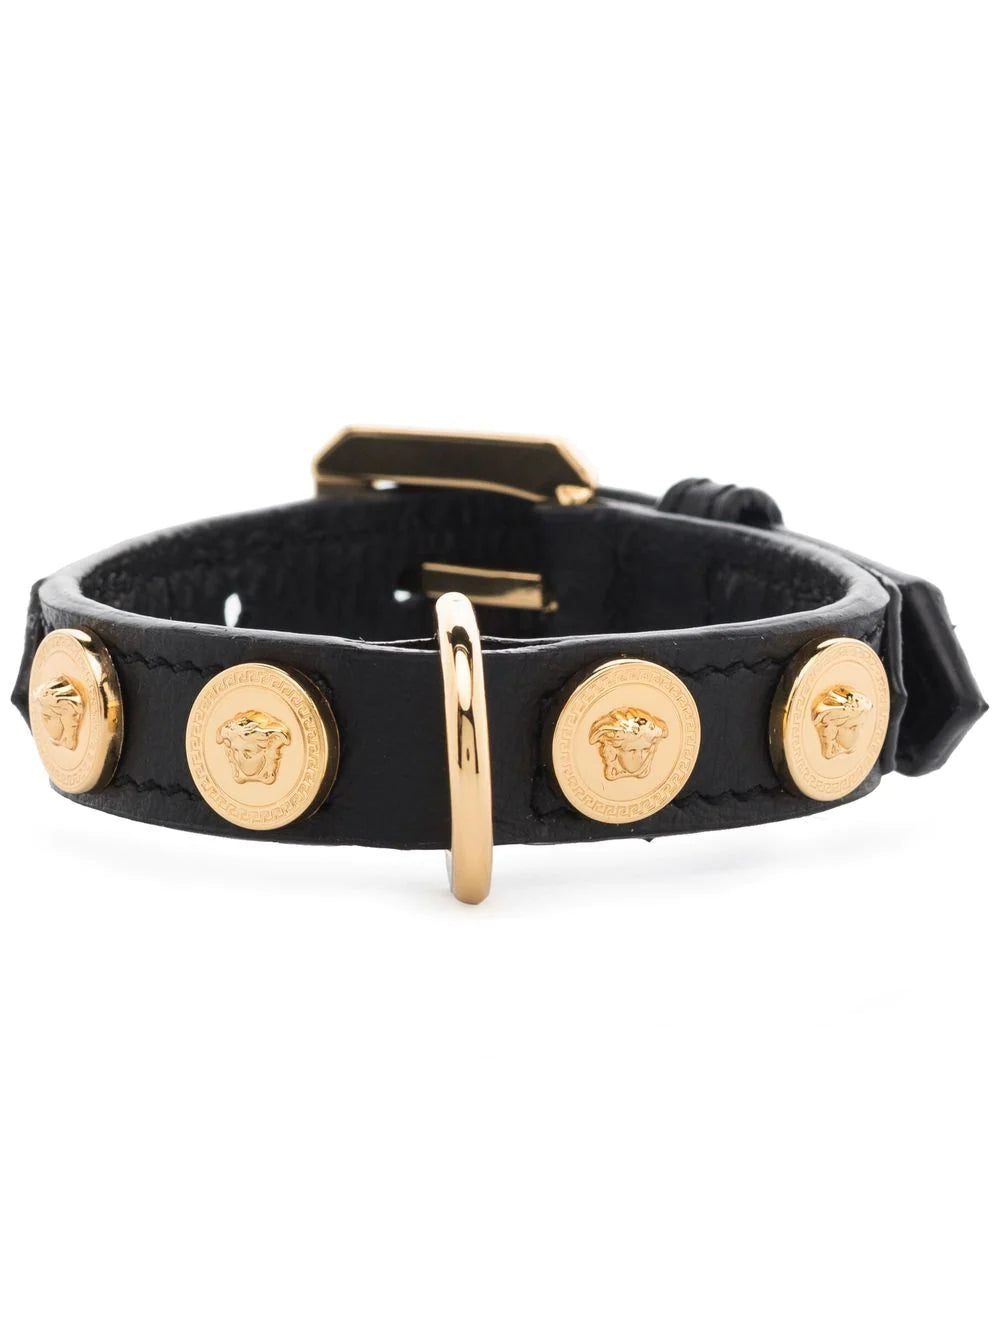 Versace Home Collar and leash set, Men's Accessorie